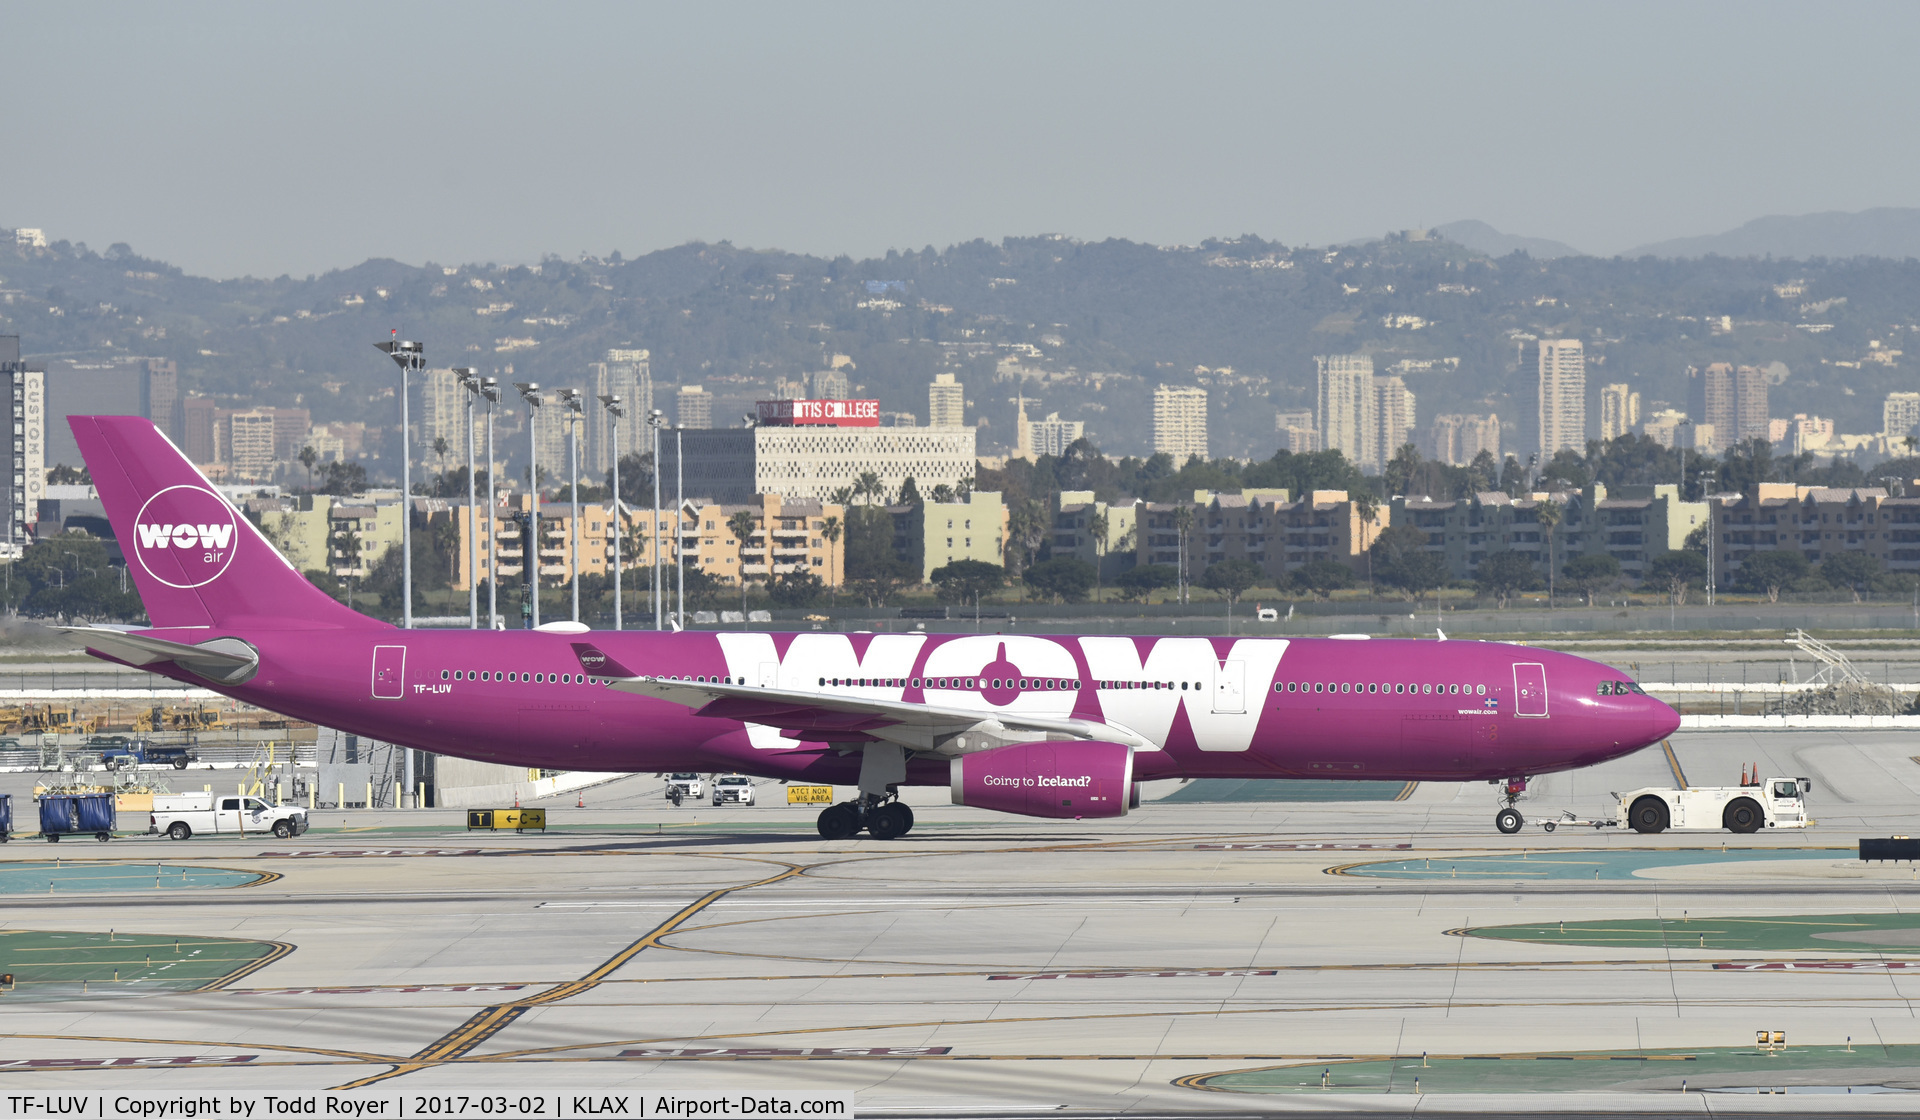 TF-LUV, 2015 Airbus A330-343 C/N 1607, Getting towed to gate at LAX